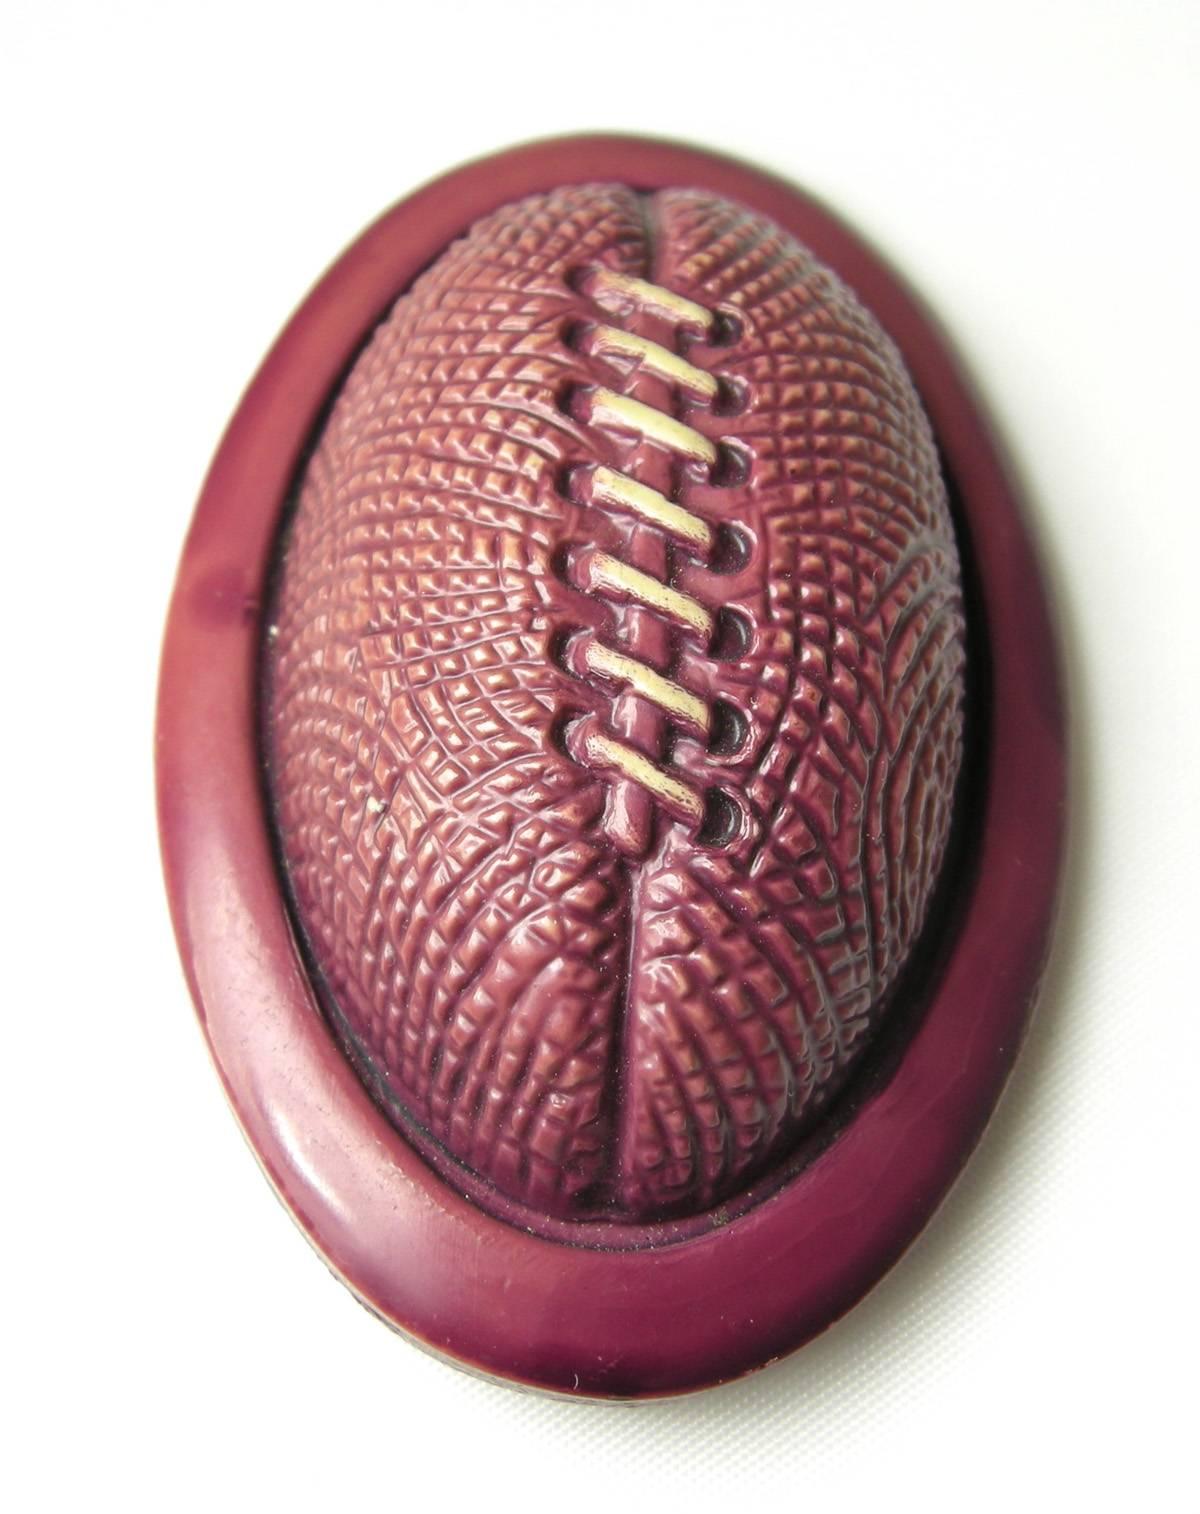 Brown Vintage Rare 1930s Celluloid Football Buttons For Sale